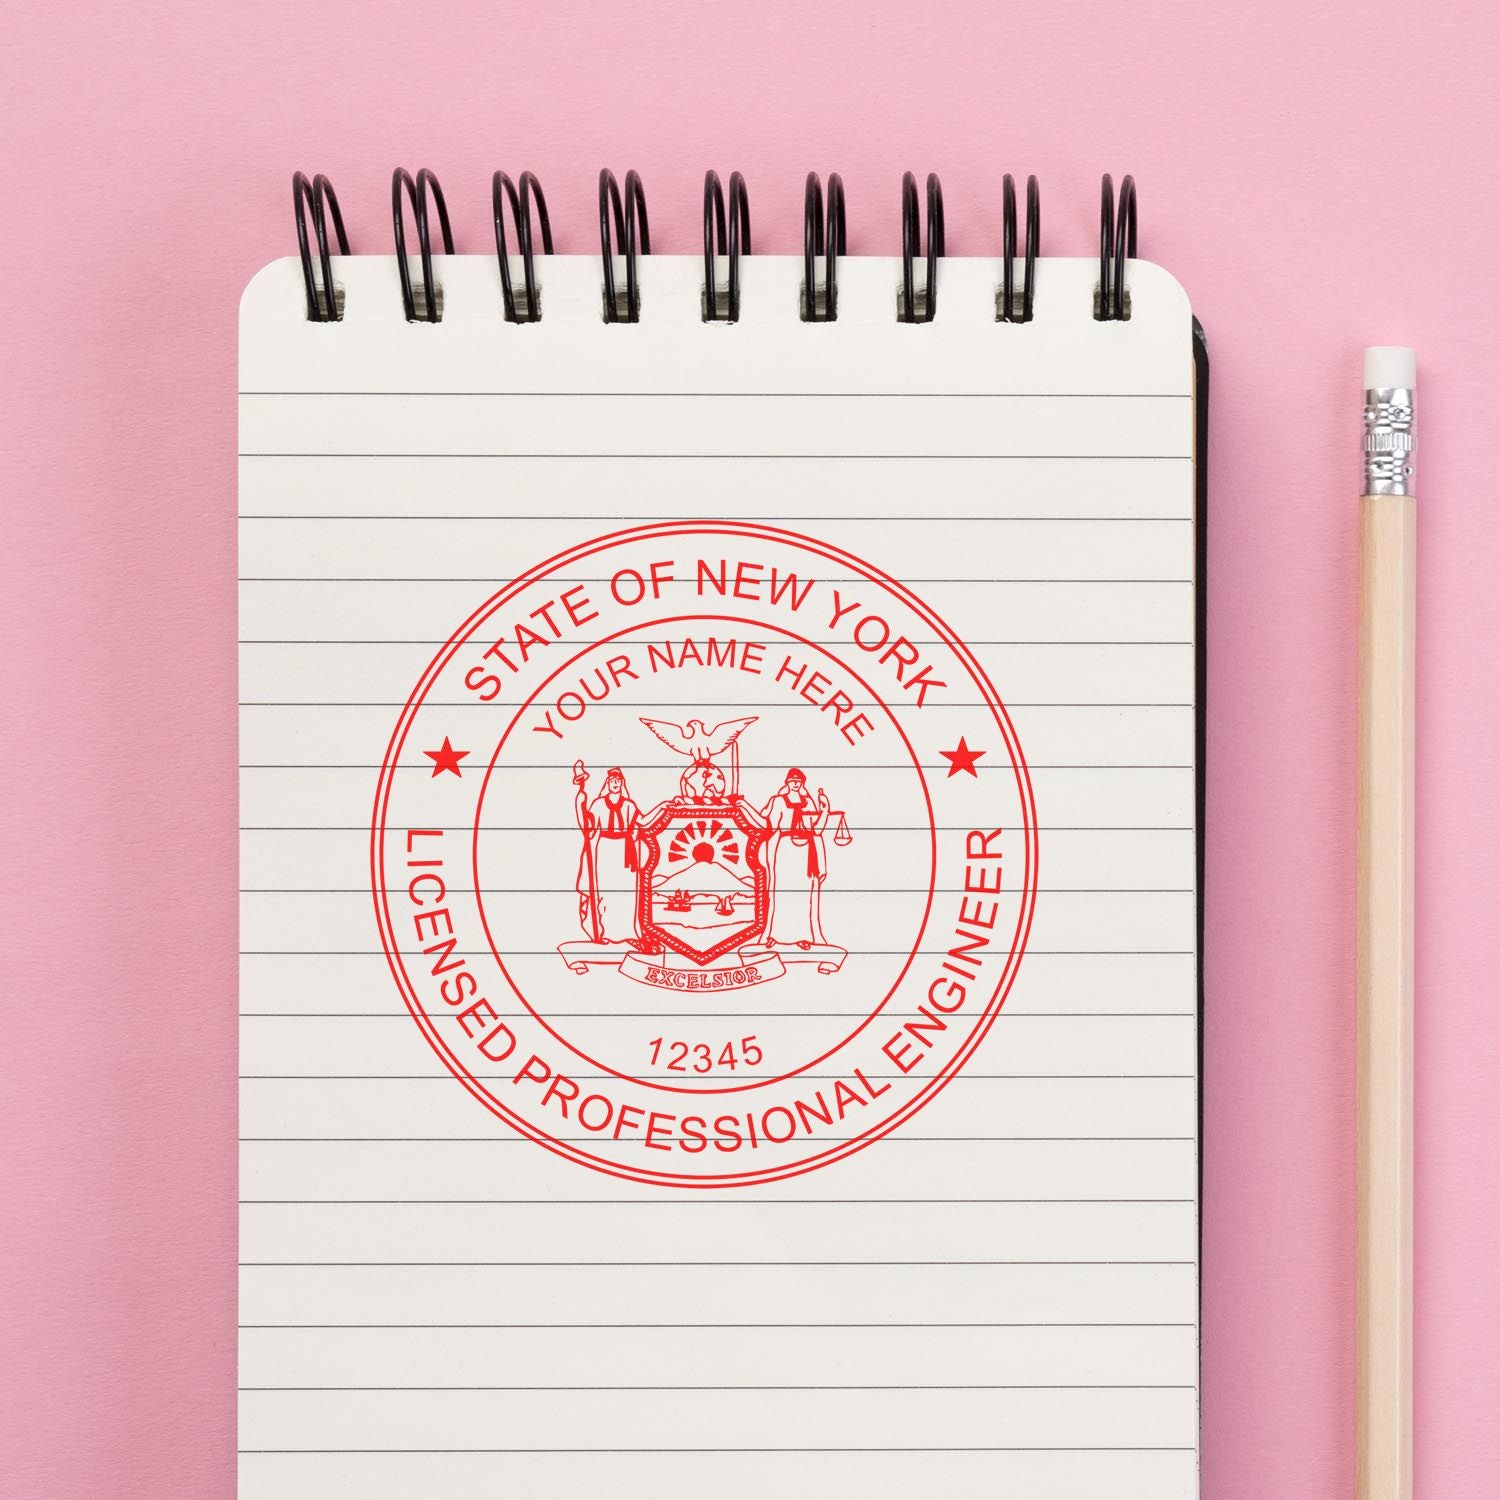 The main image for the New York Professional Engineer Seal Stamp depicting a sample of the imprint and electronic files